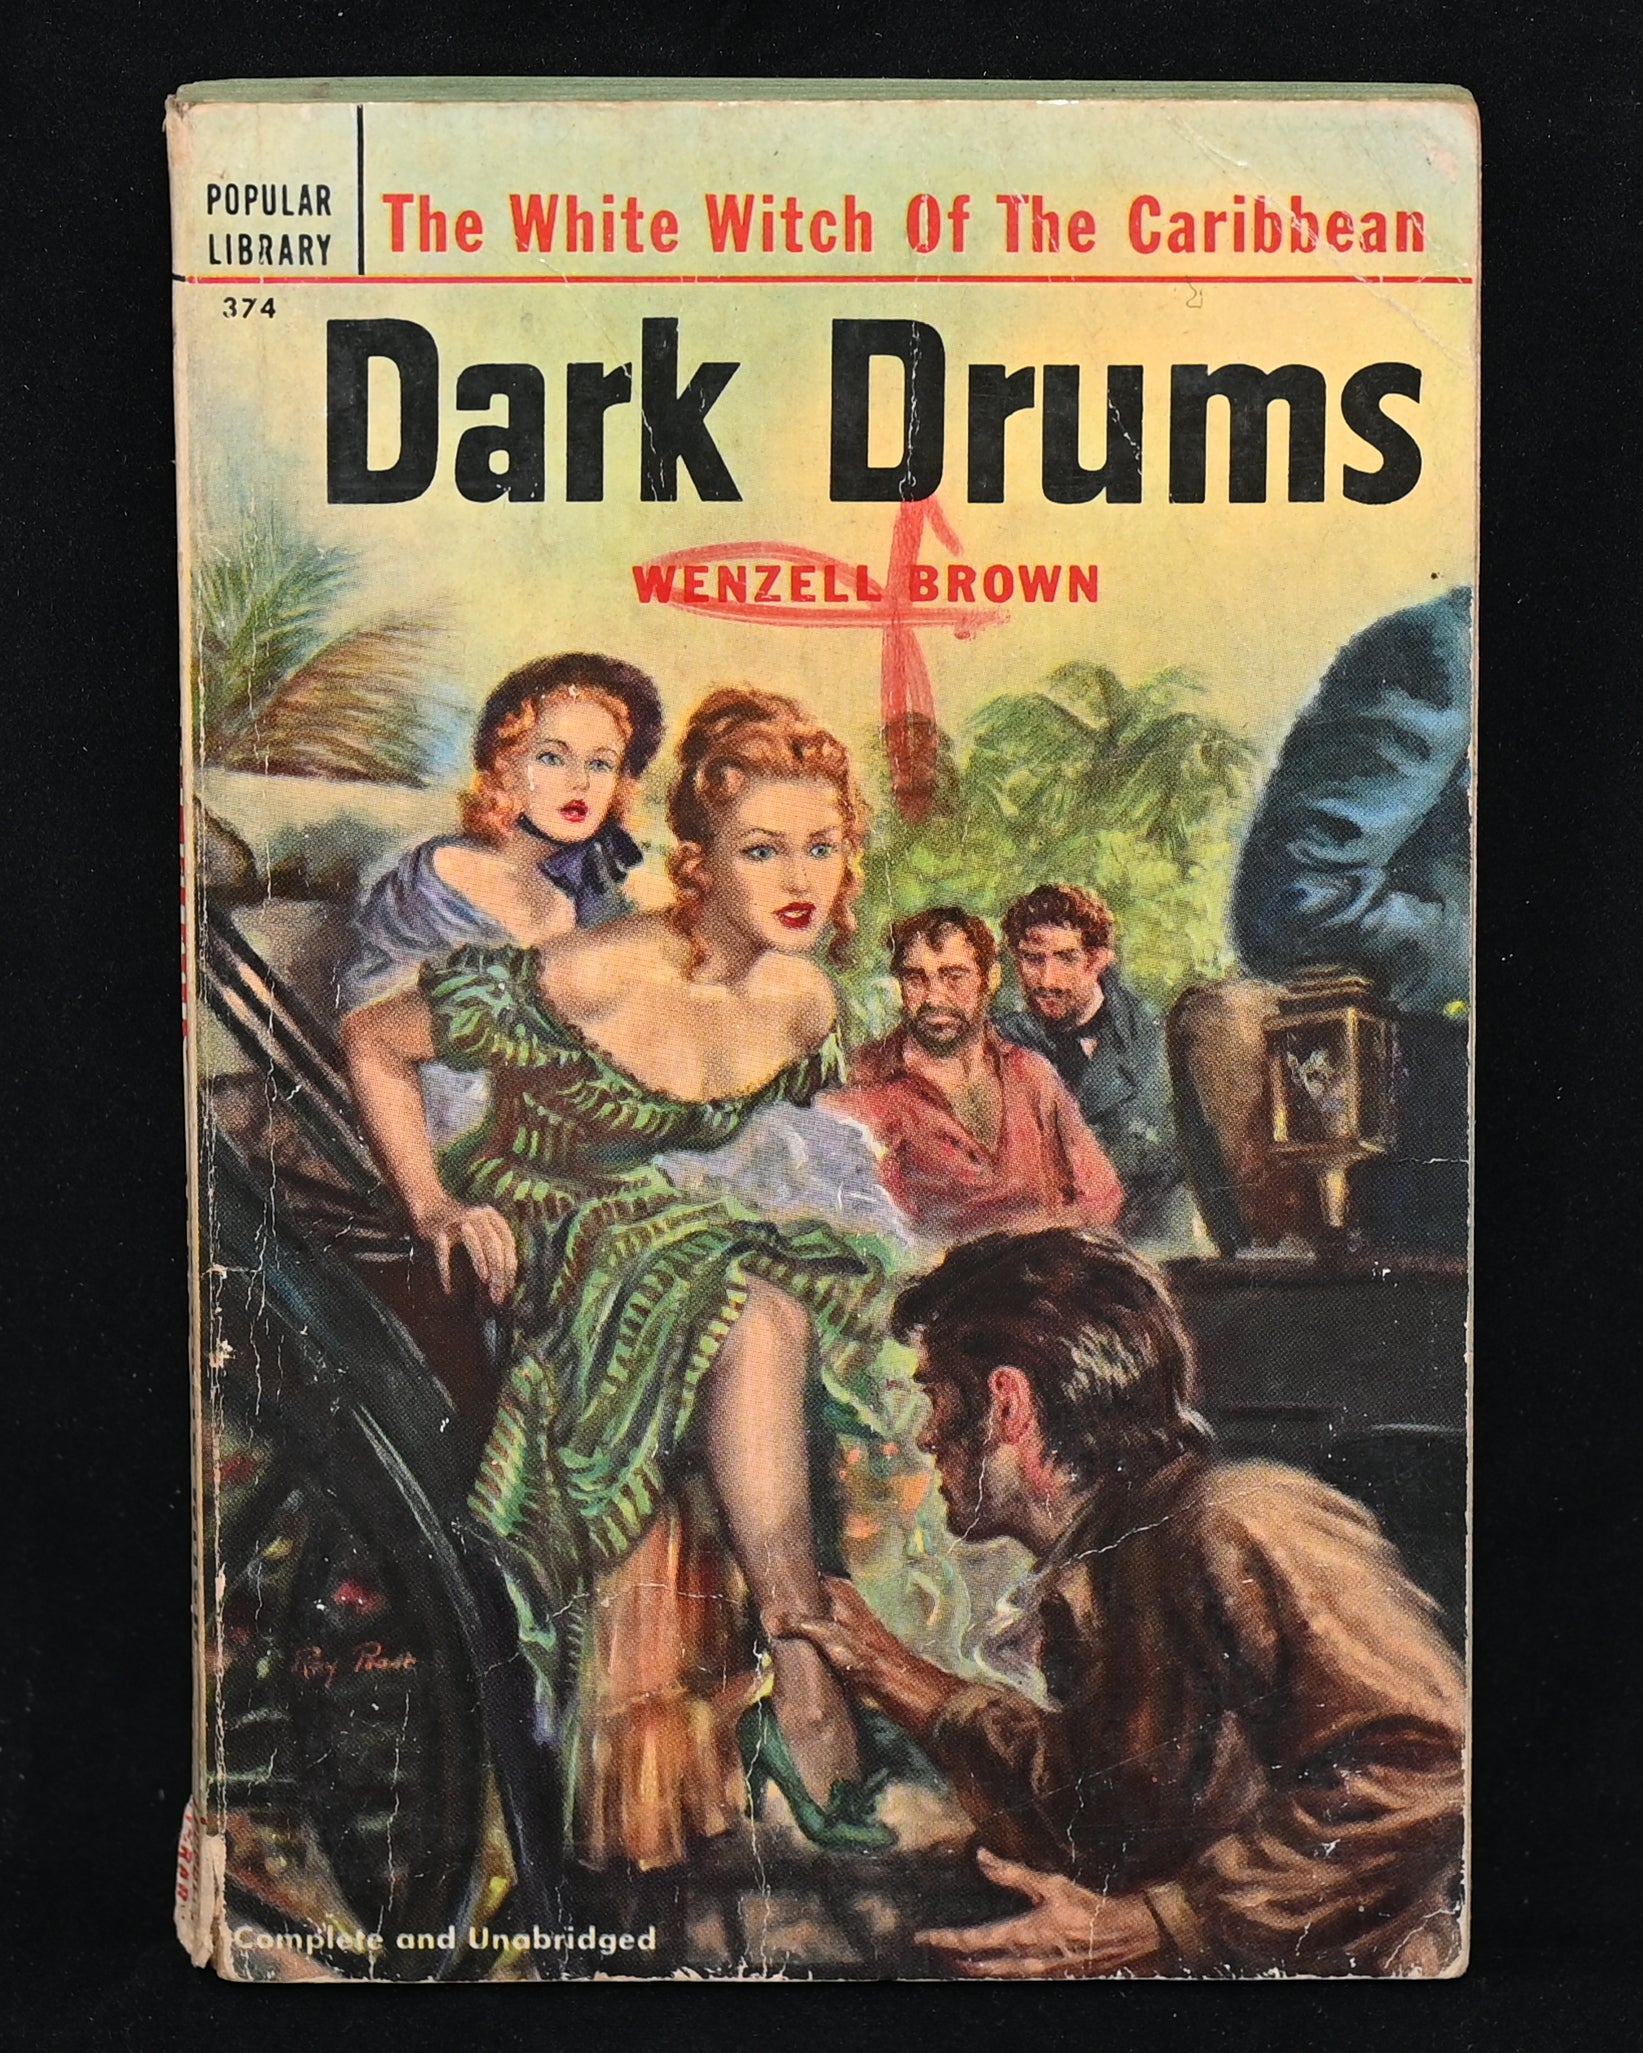 Vintage Sleaze Pulp Erotica - Adults Only